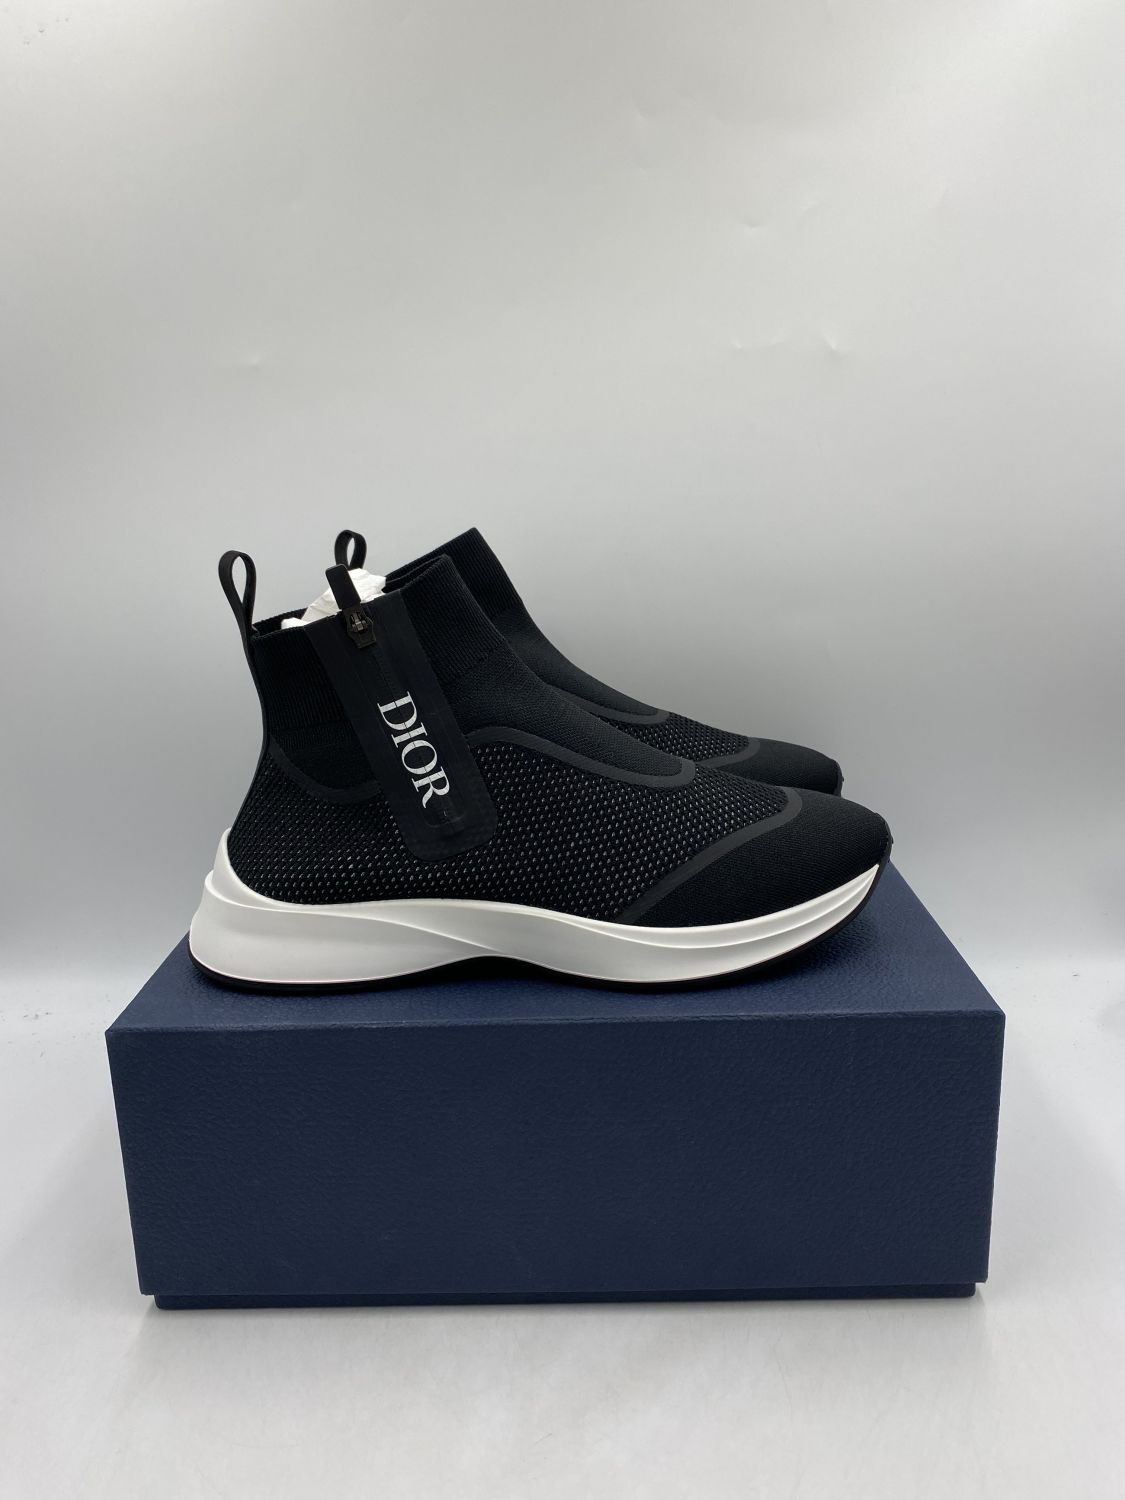 CHRISTIAN DIOR B25 RUNNER SNEAKER BLACK DIOR OBLIQUE CANVAS AND SUEDE